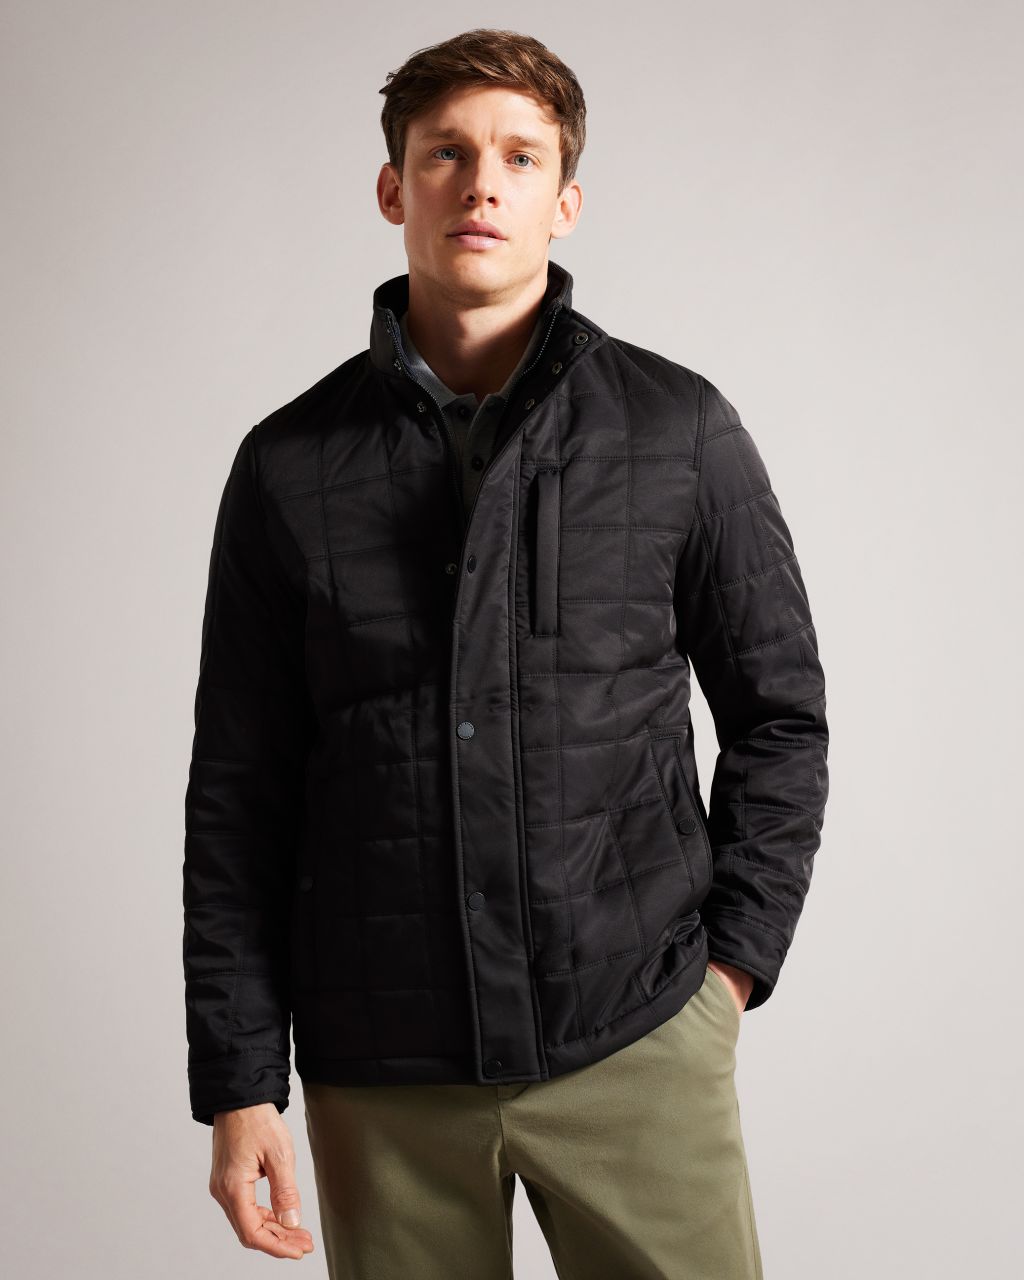 Men's Quilted Jacket in Black, Humber product